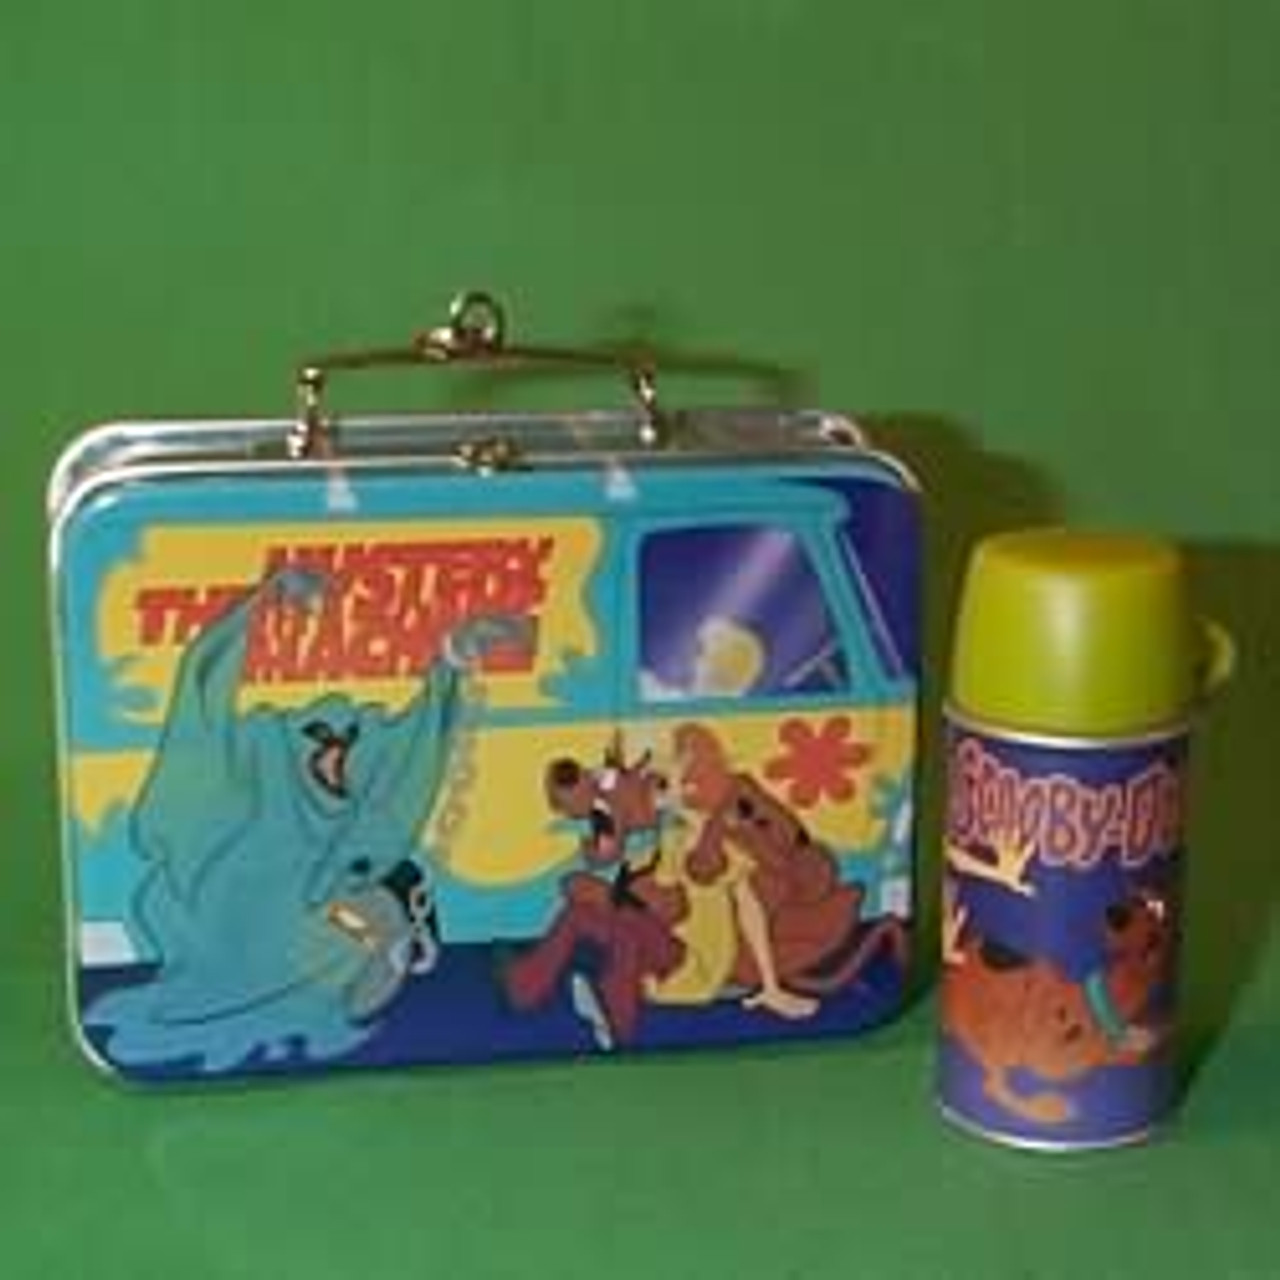 scooby doo lunchbox - lost & found vintage toys